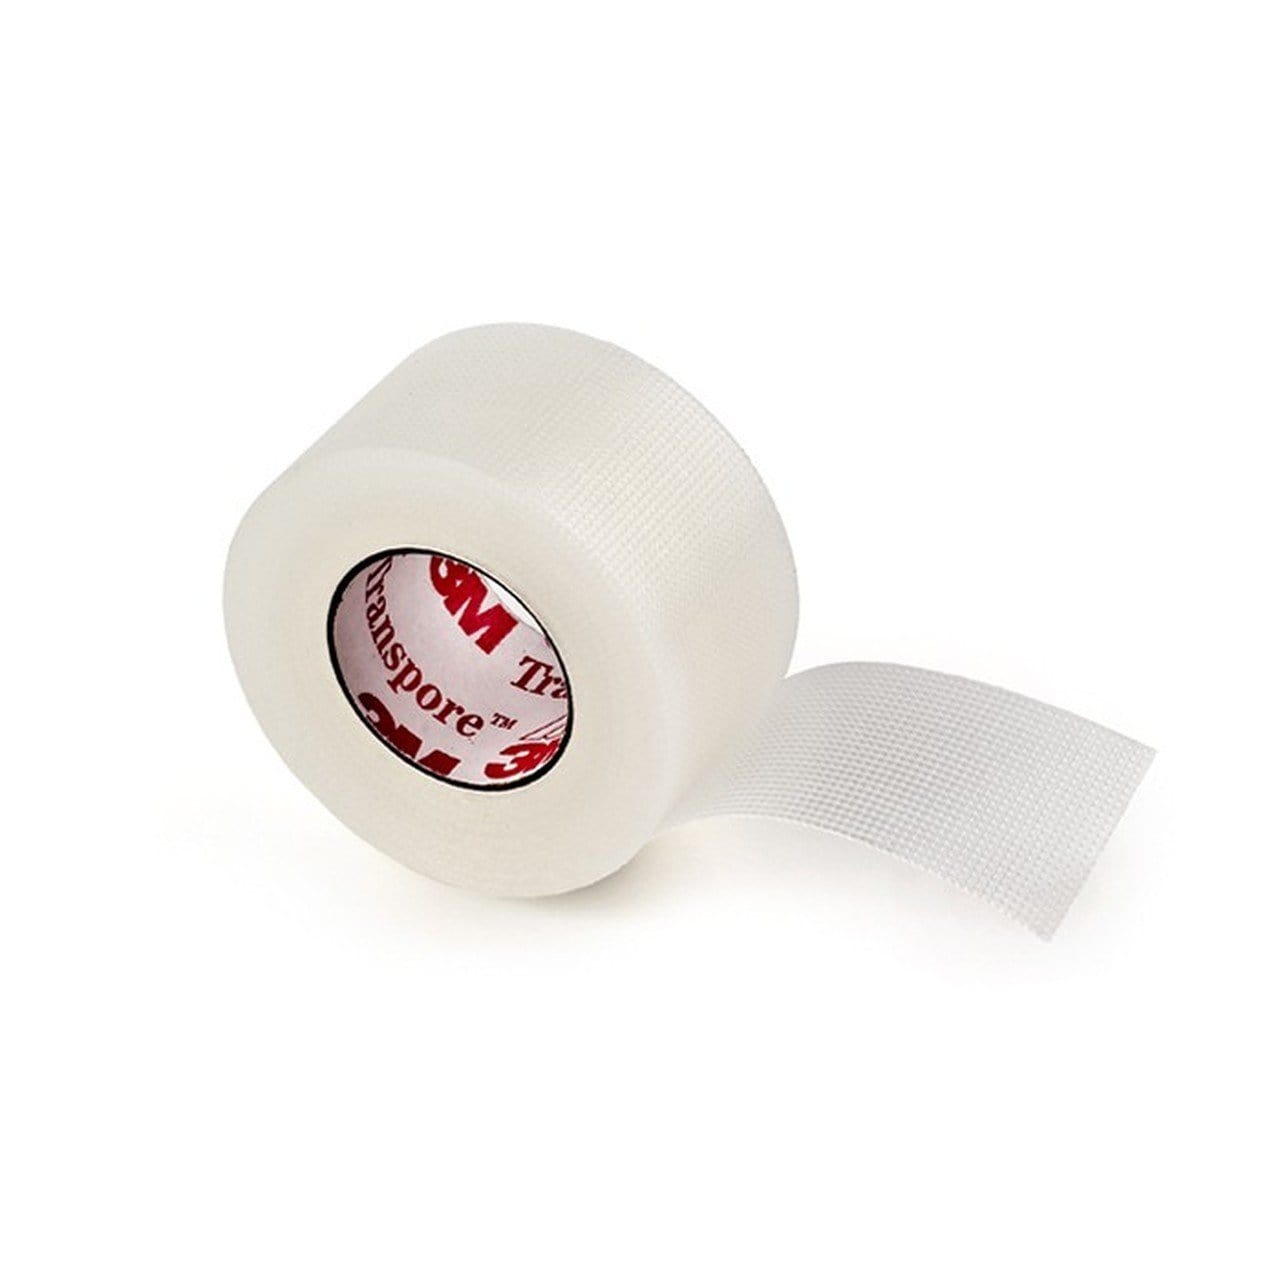 3M Healthcare Surgical Tapes Plastic Surgical Tape / 12mm x 9.1m 3M Transpore Surgical Tape